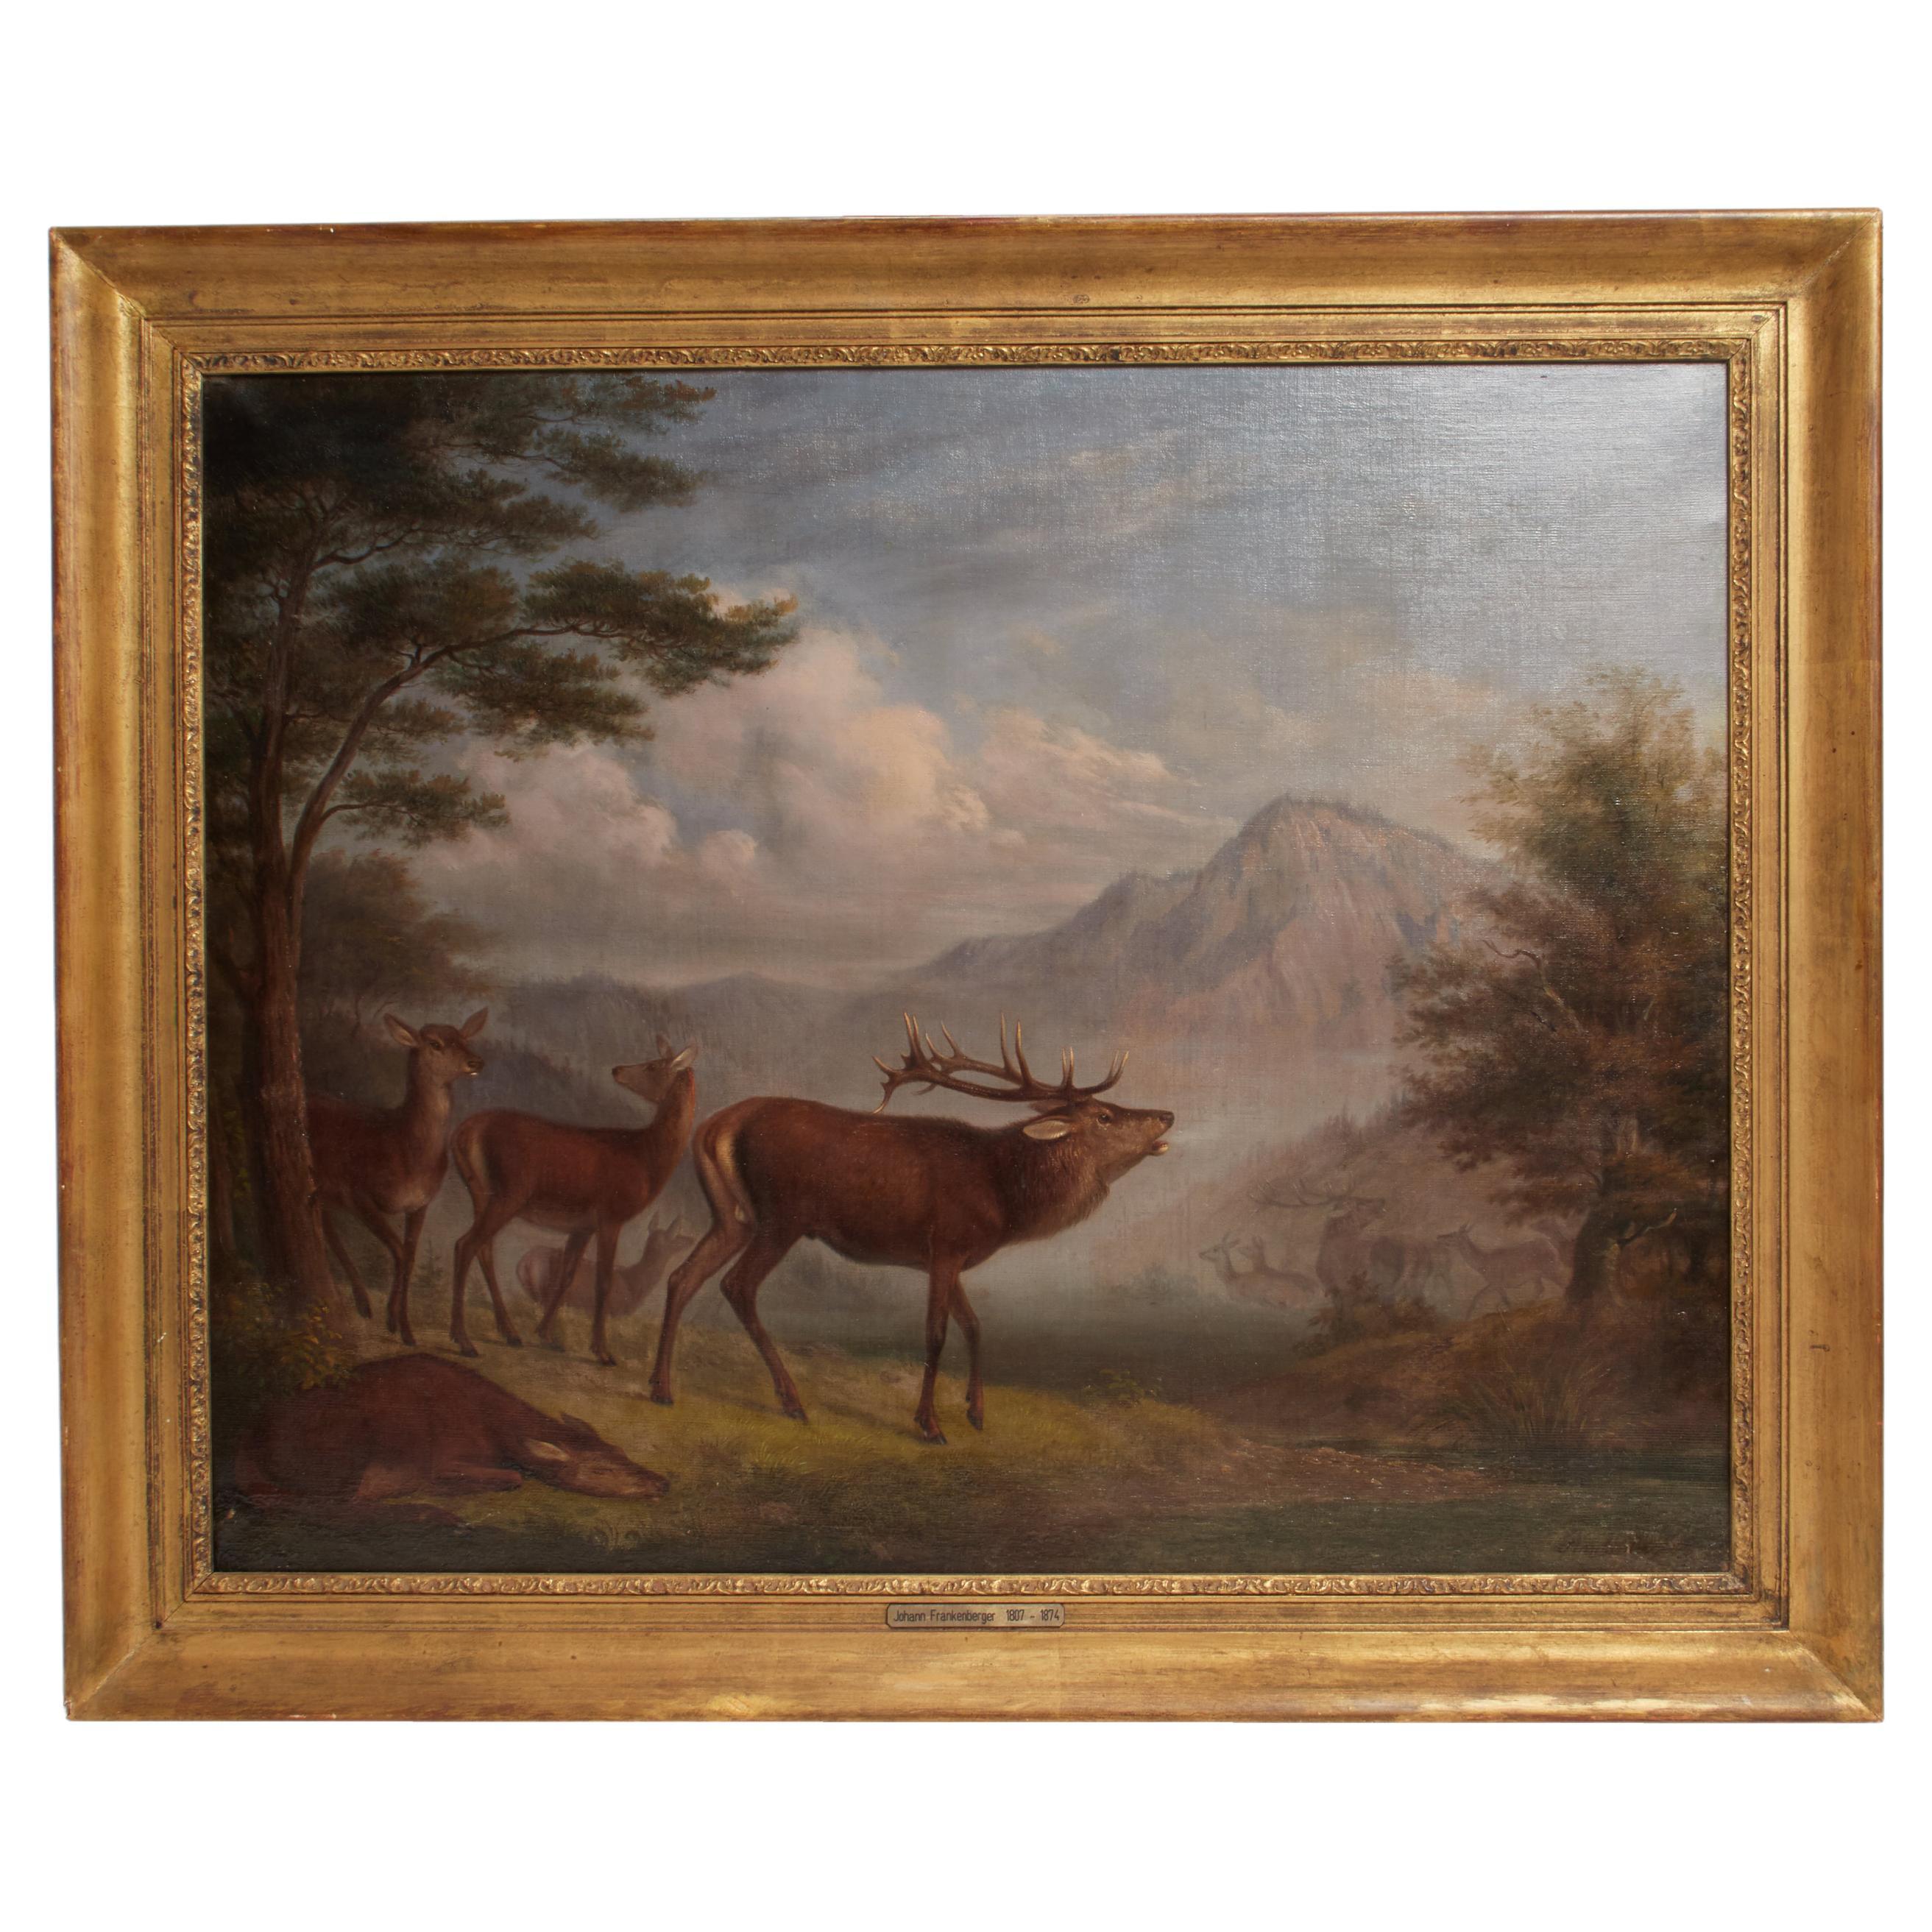 Painting oil on canvas with wild stags. By Johann Frankenberger, Germany 1840. 